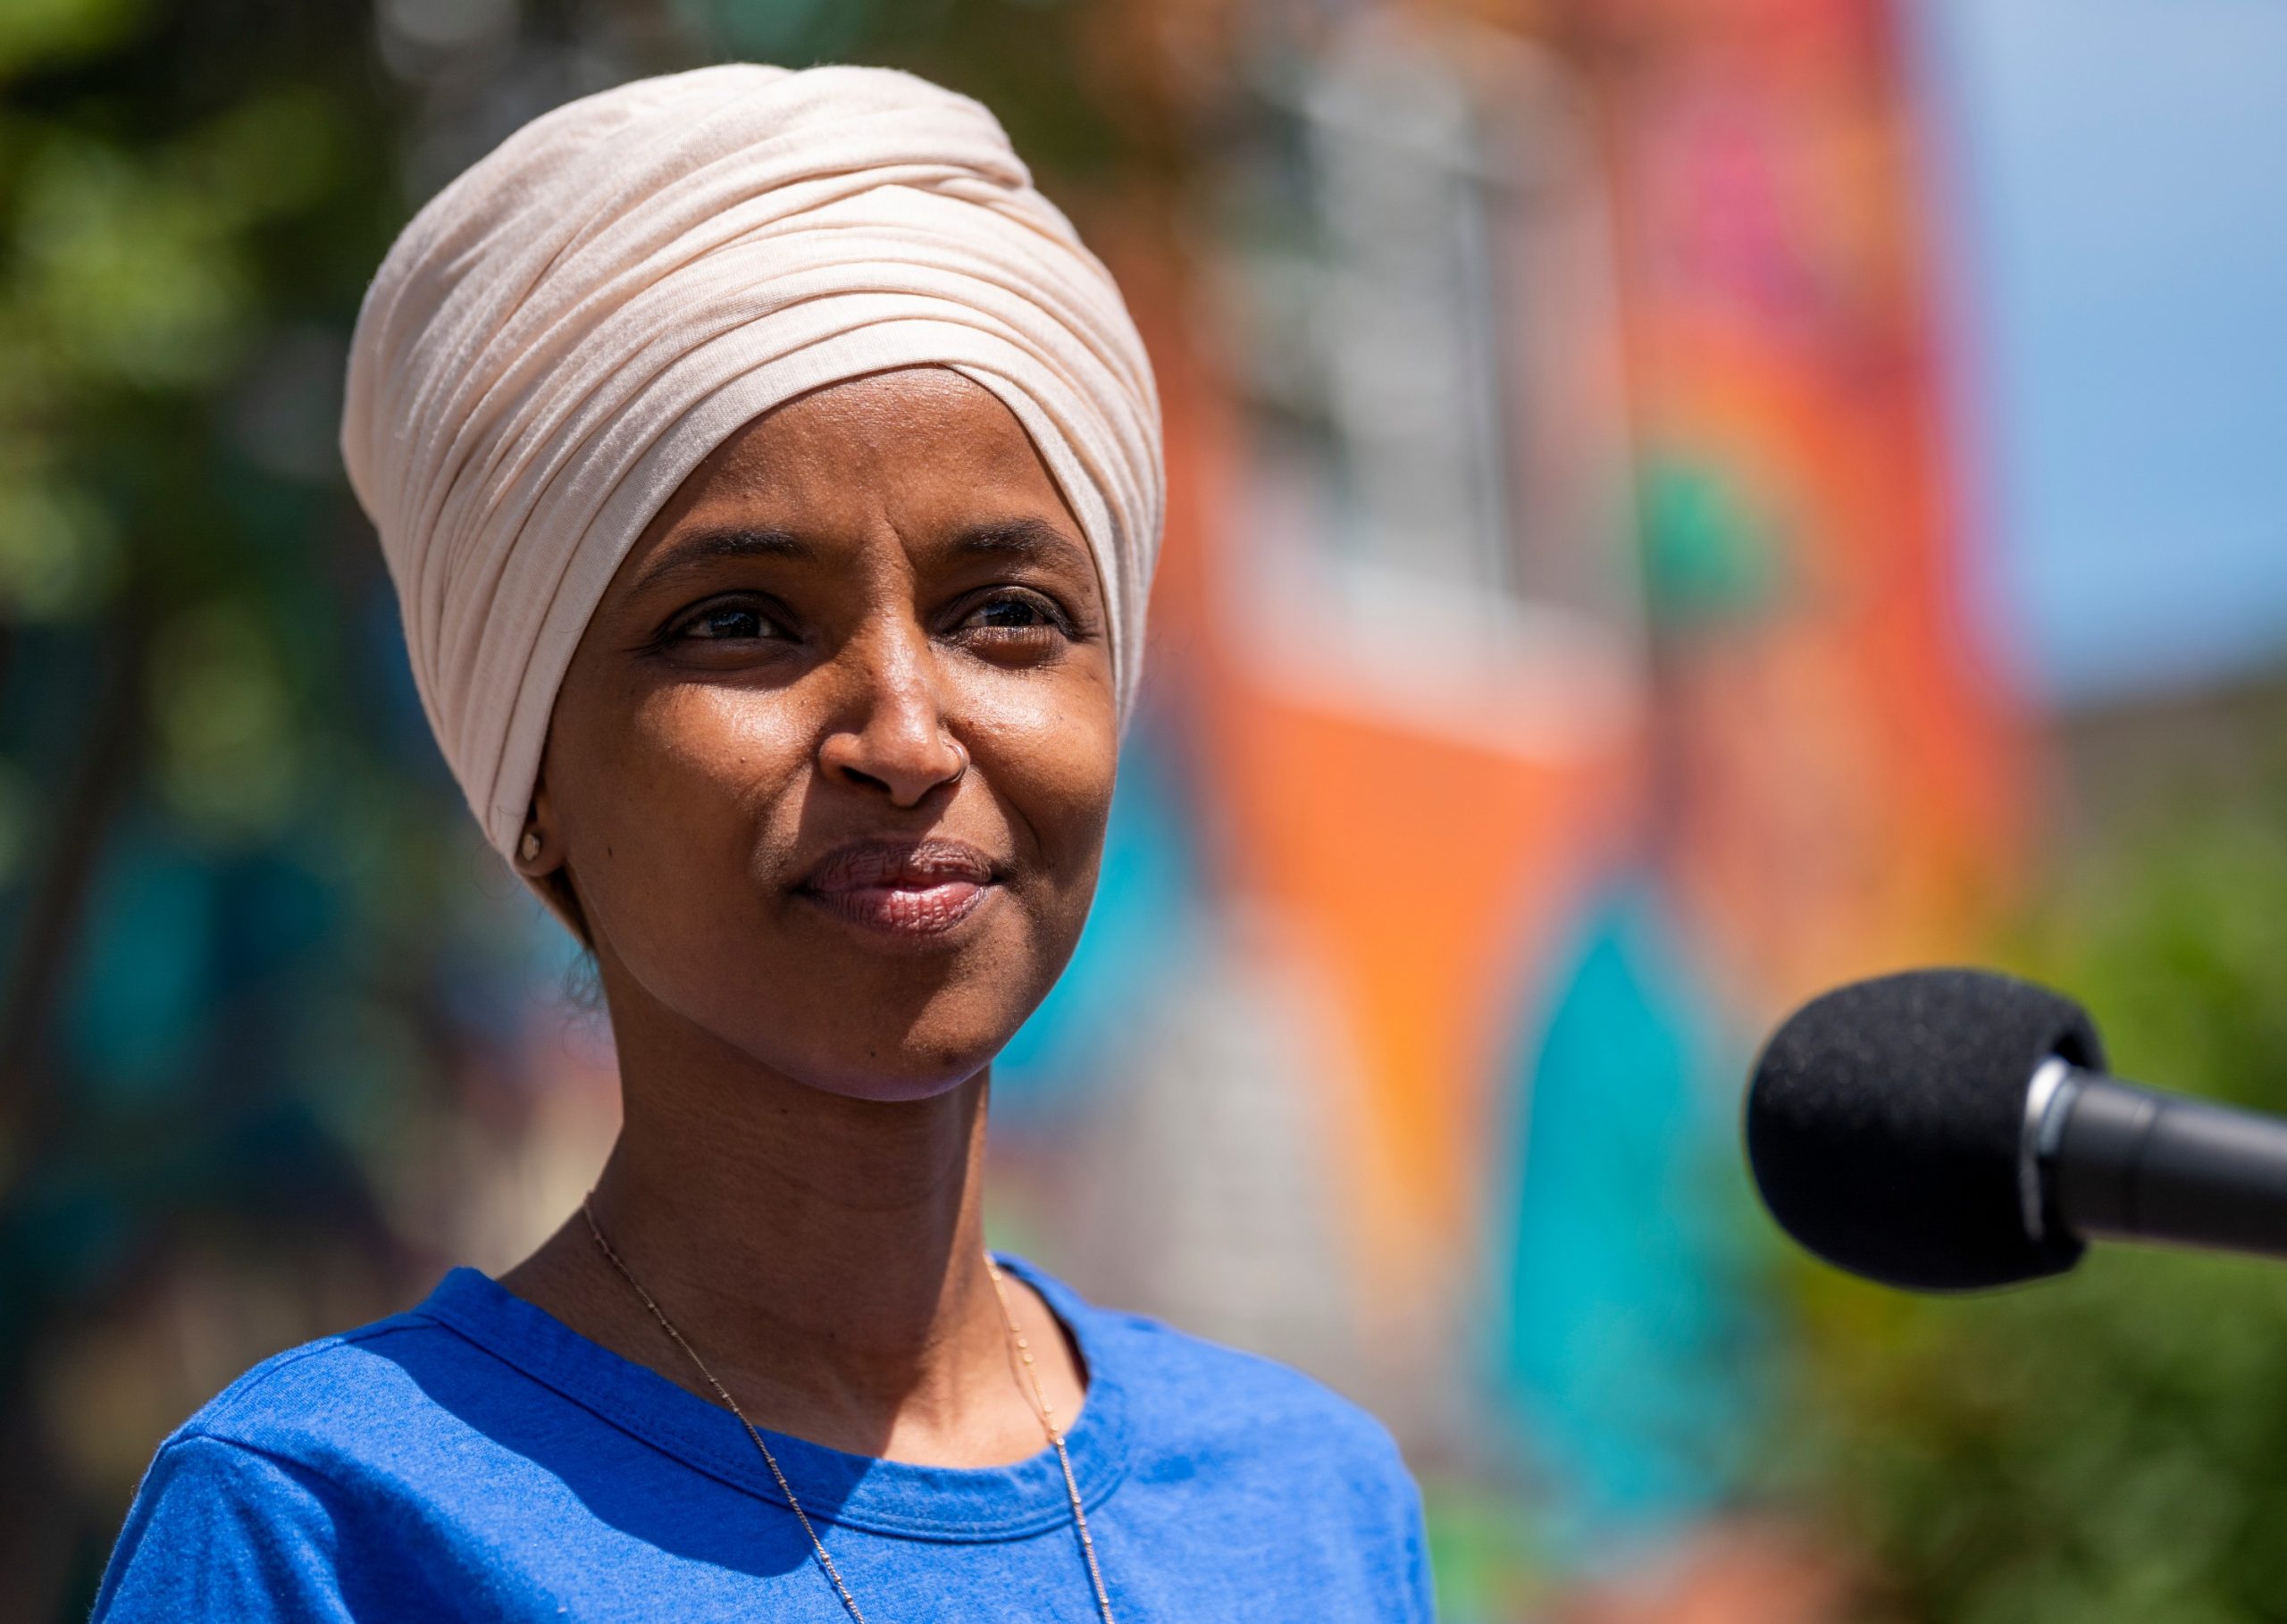 Trump falsely accuses Ilhan Omar of entering the United States illegally and marrying her brother in a rally